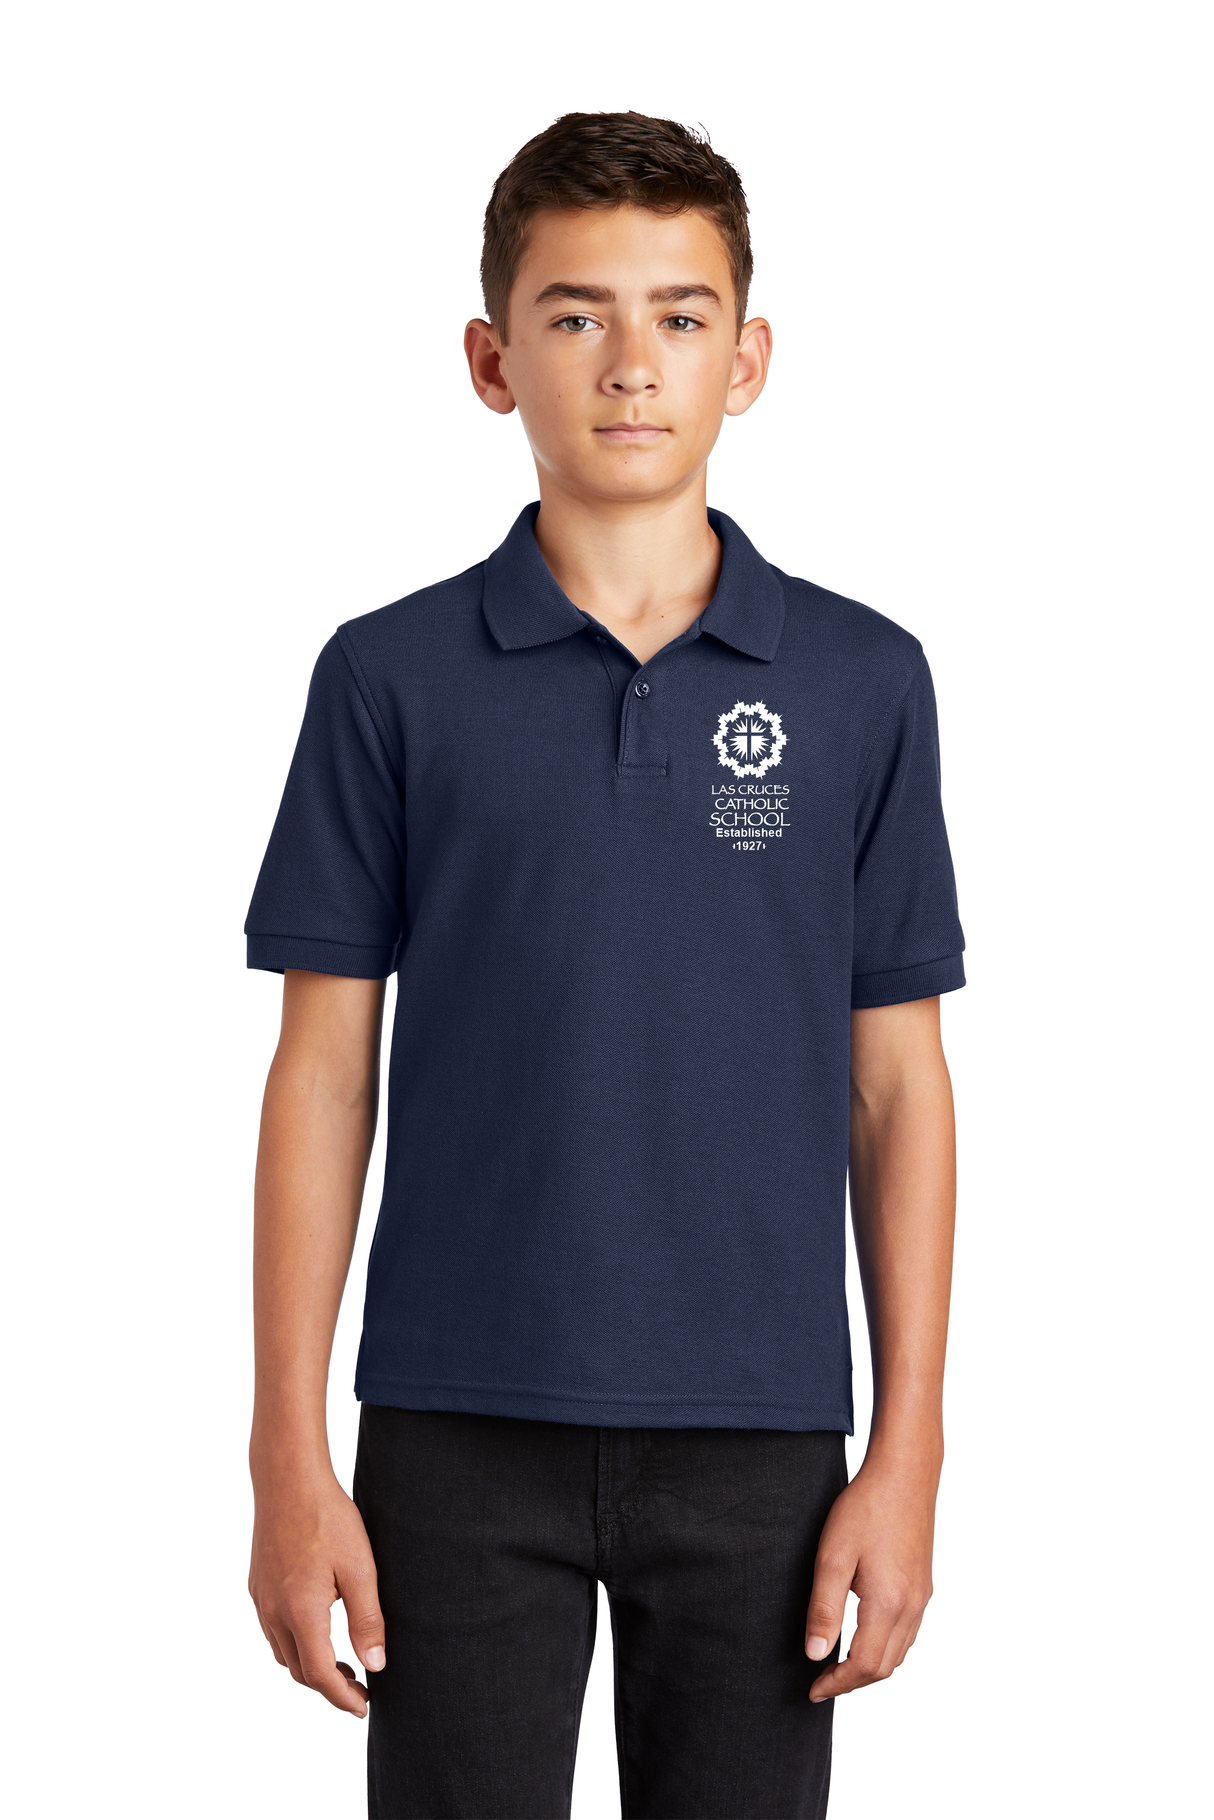 LCCS Middle School Youth Uniform Polo